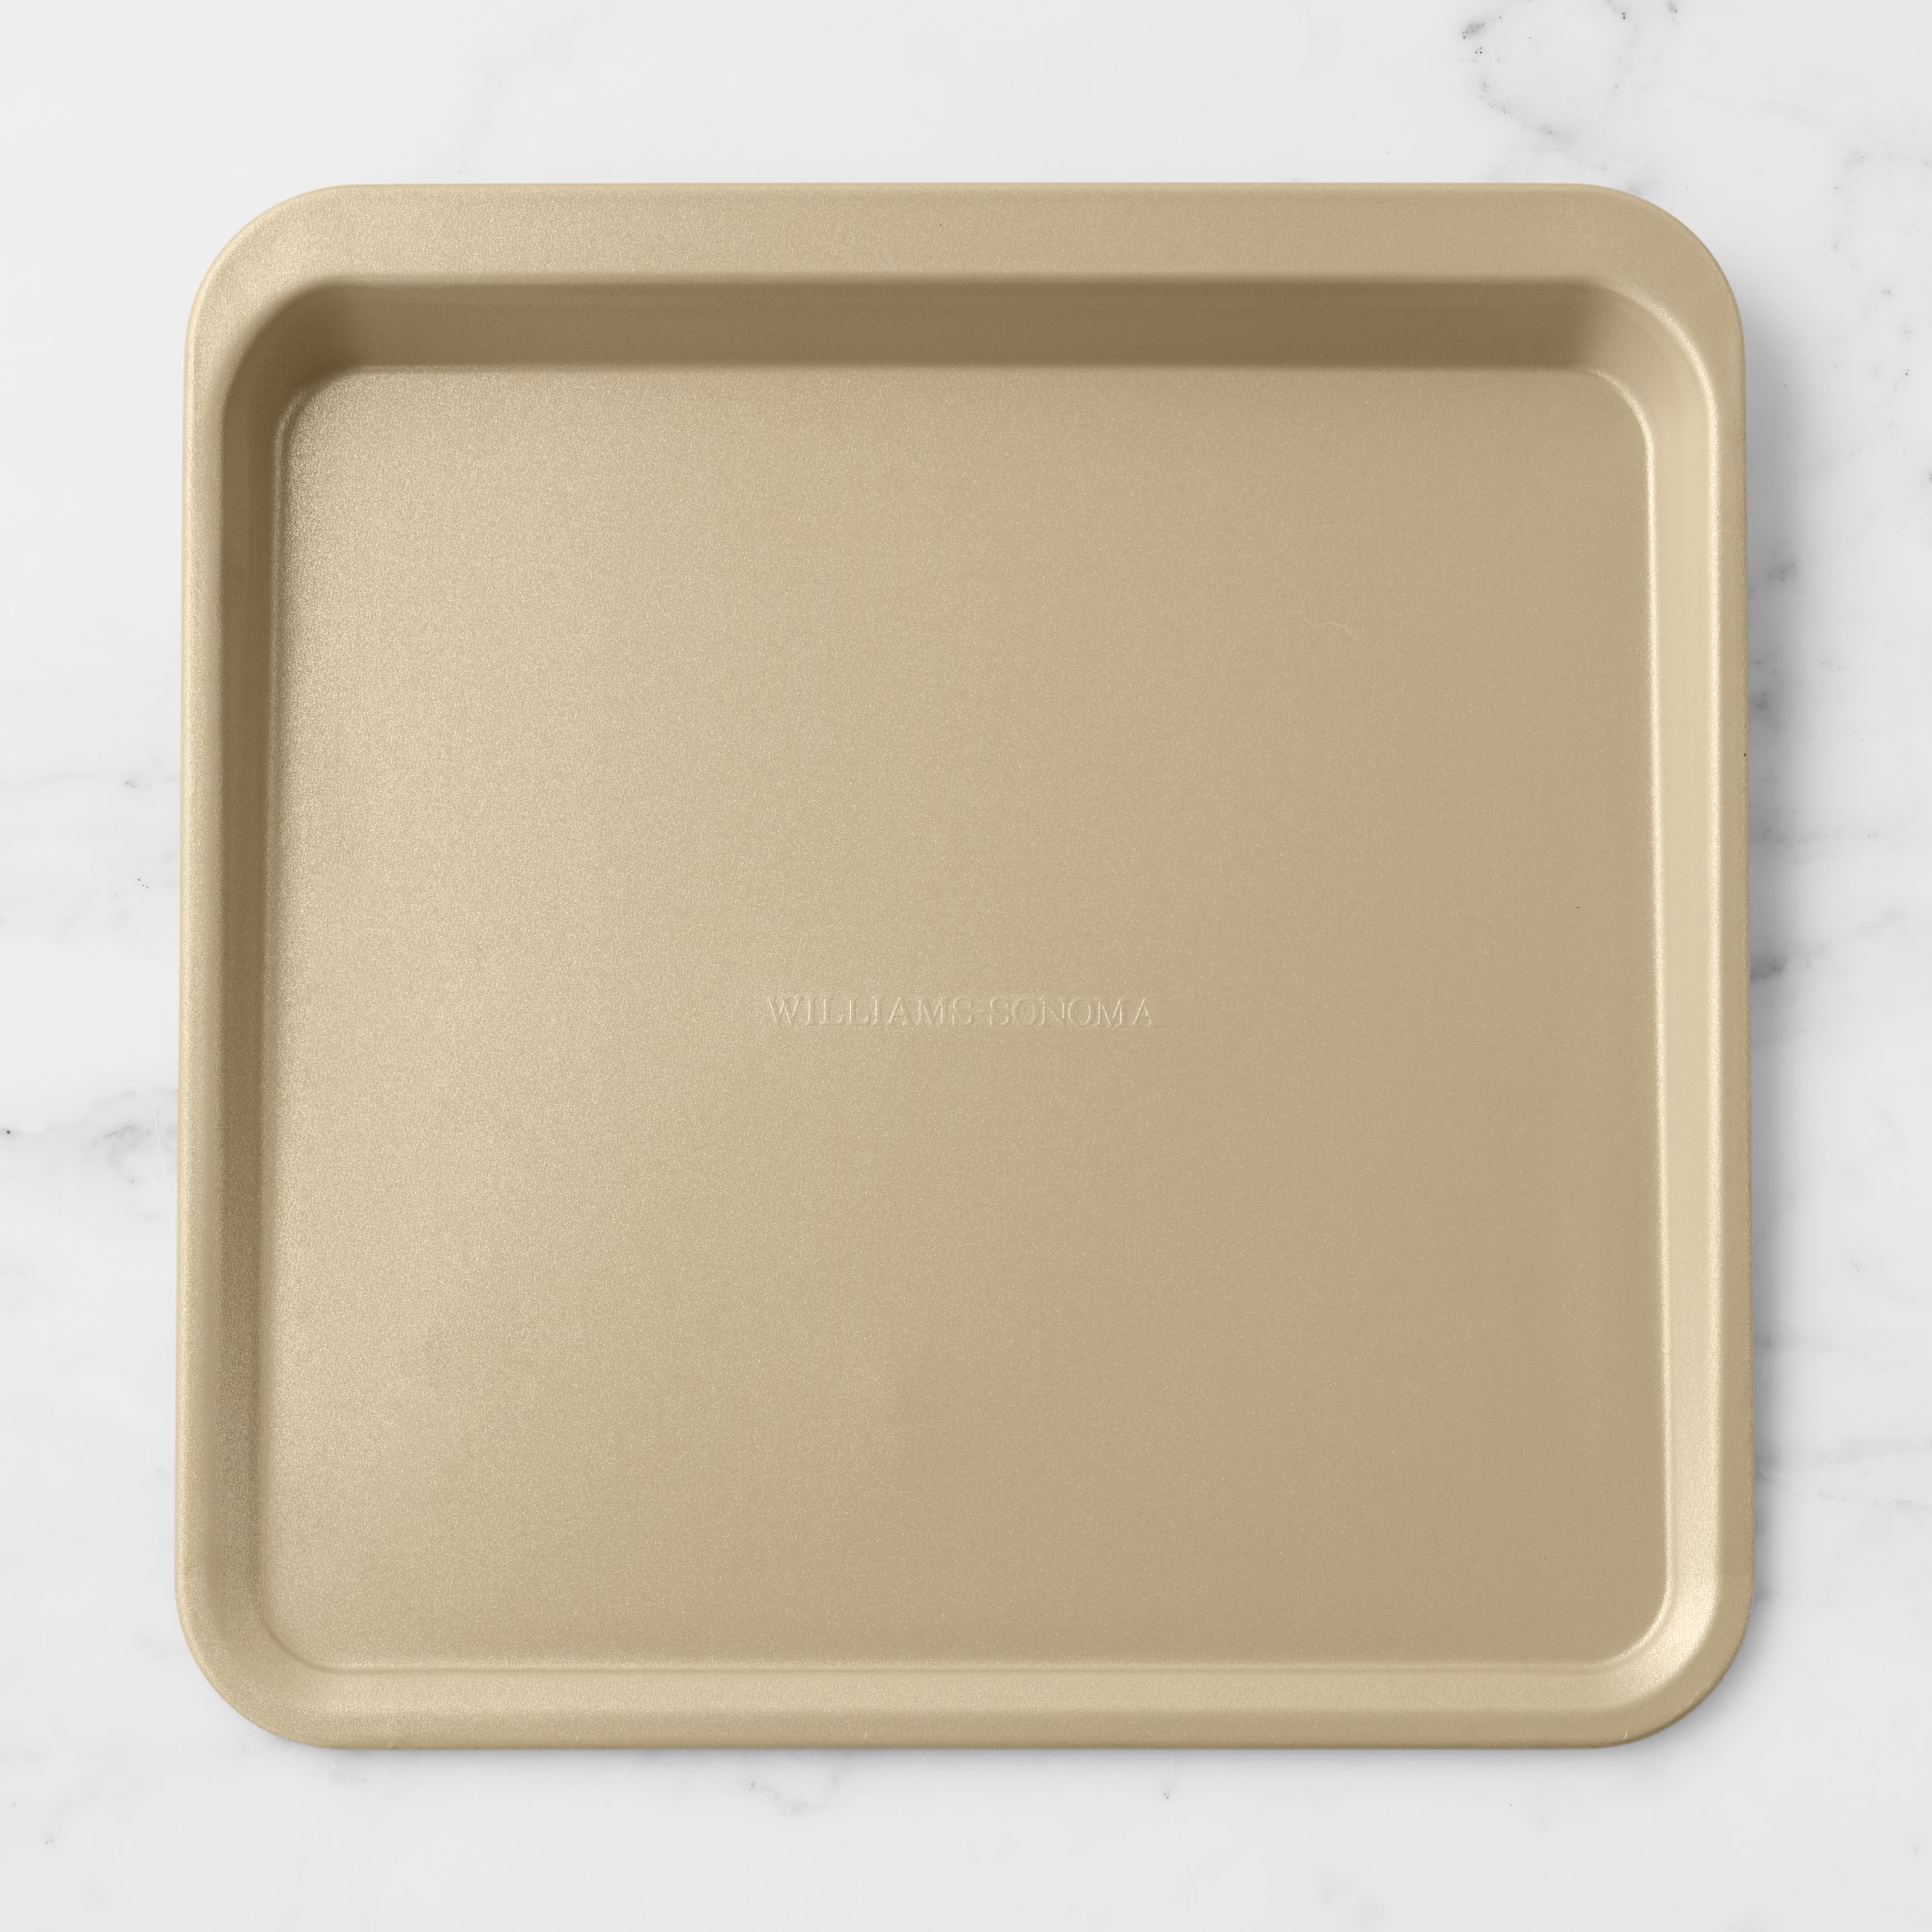 Williams Sonoma Goldtouch® Pro Nonstick Cookie Sheet with Scoop Edge